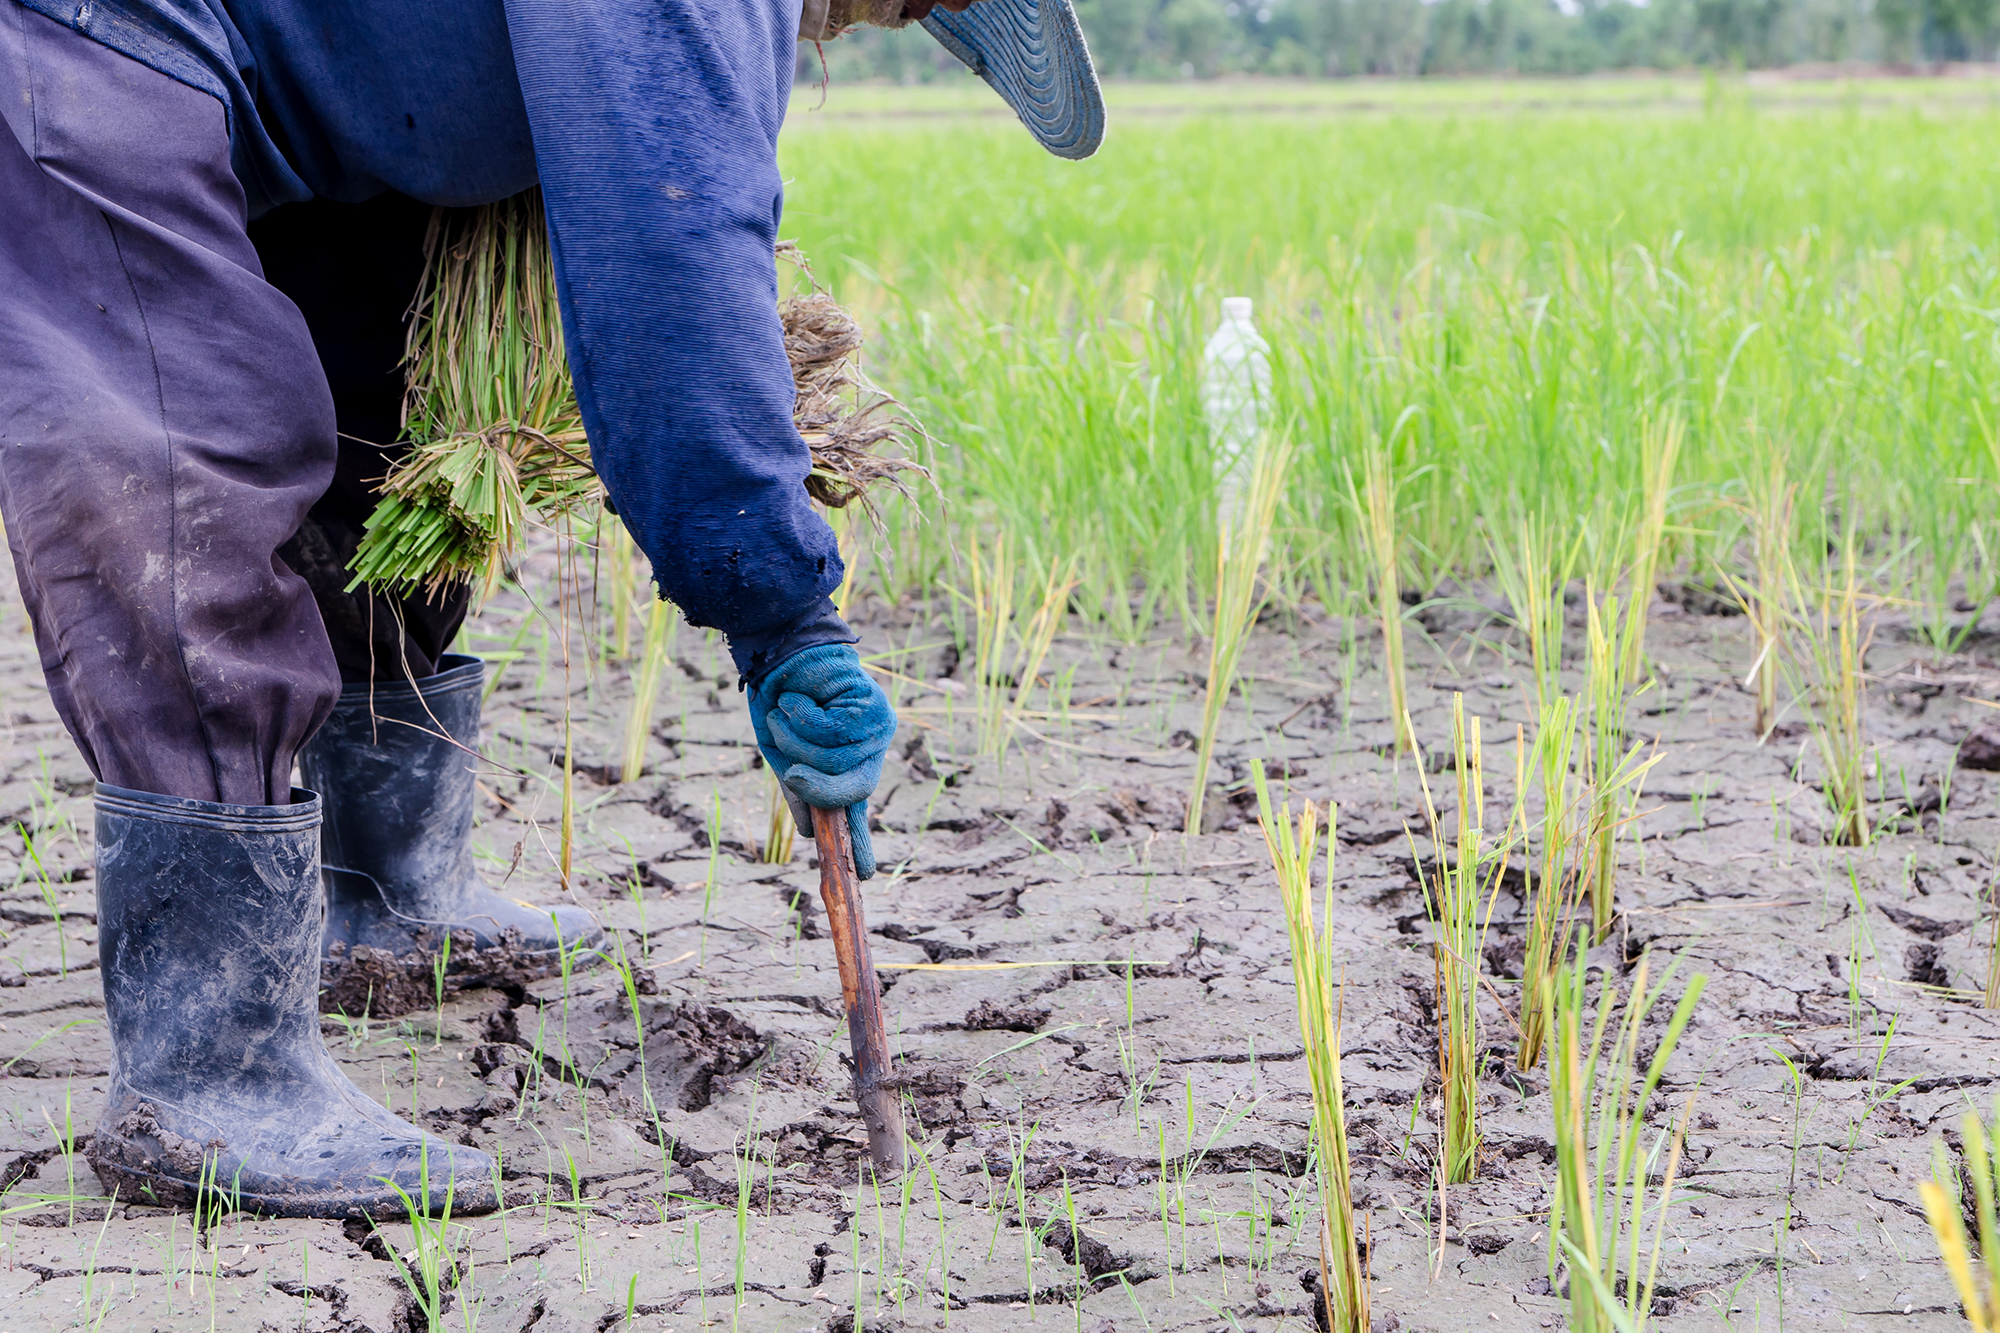 A photo of a farmer who is digging into dry soil in a field of crops